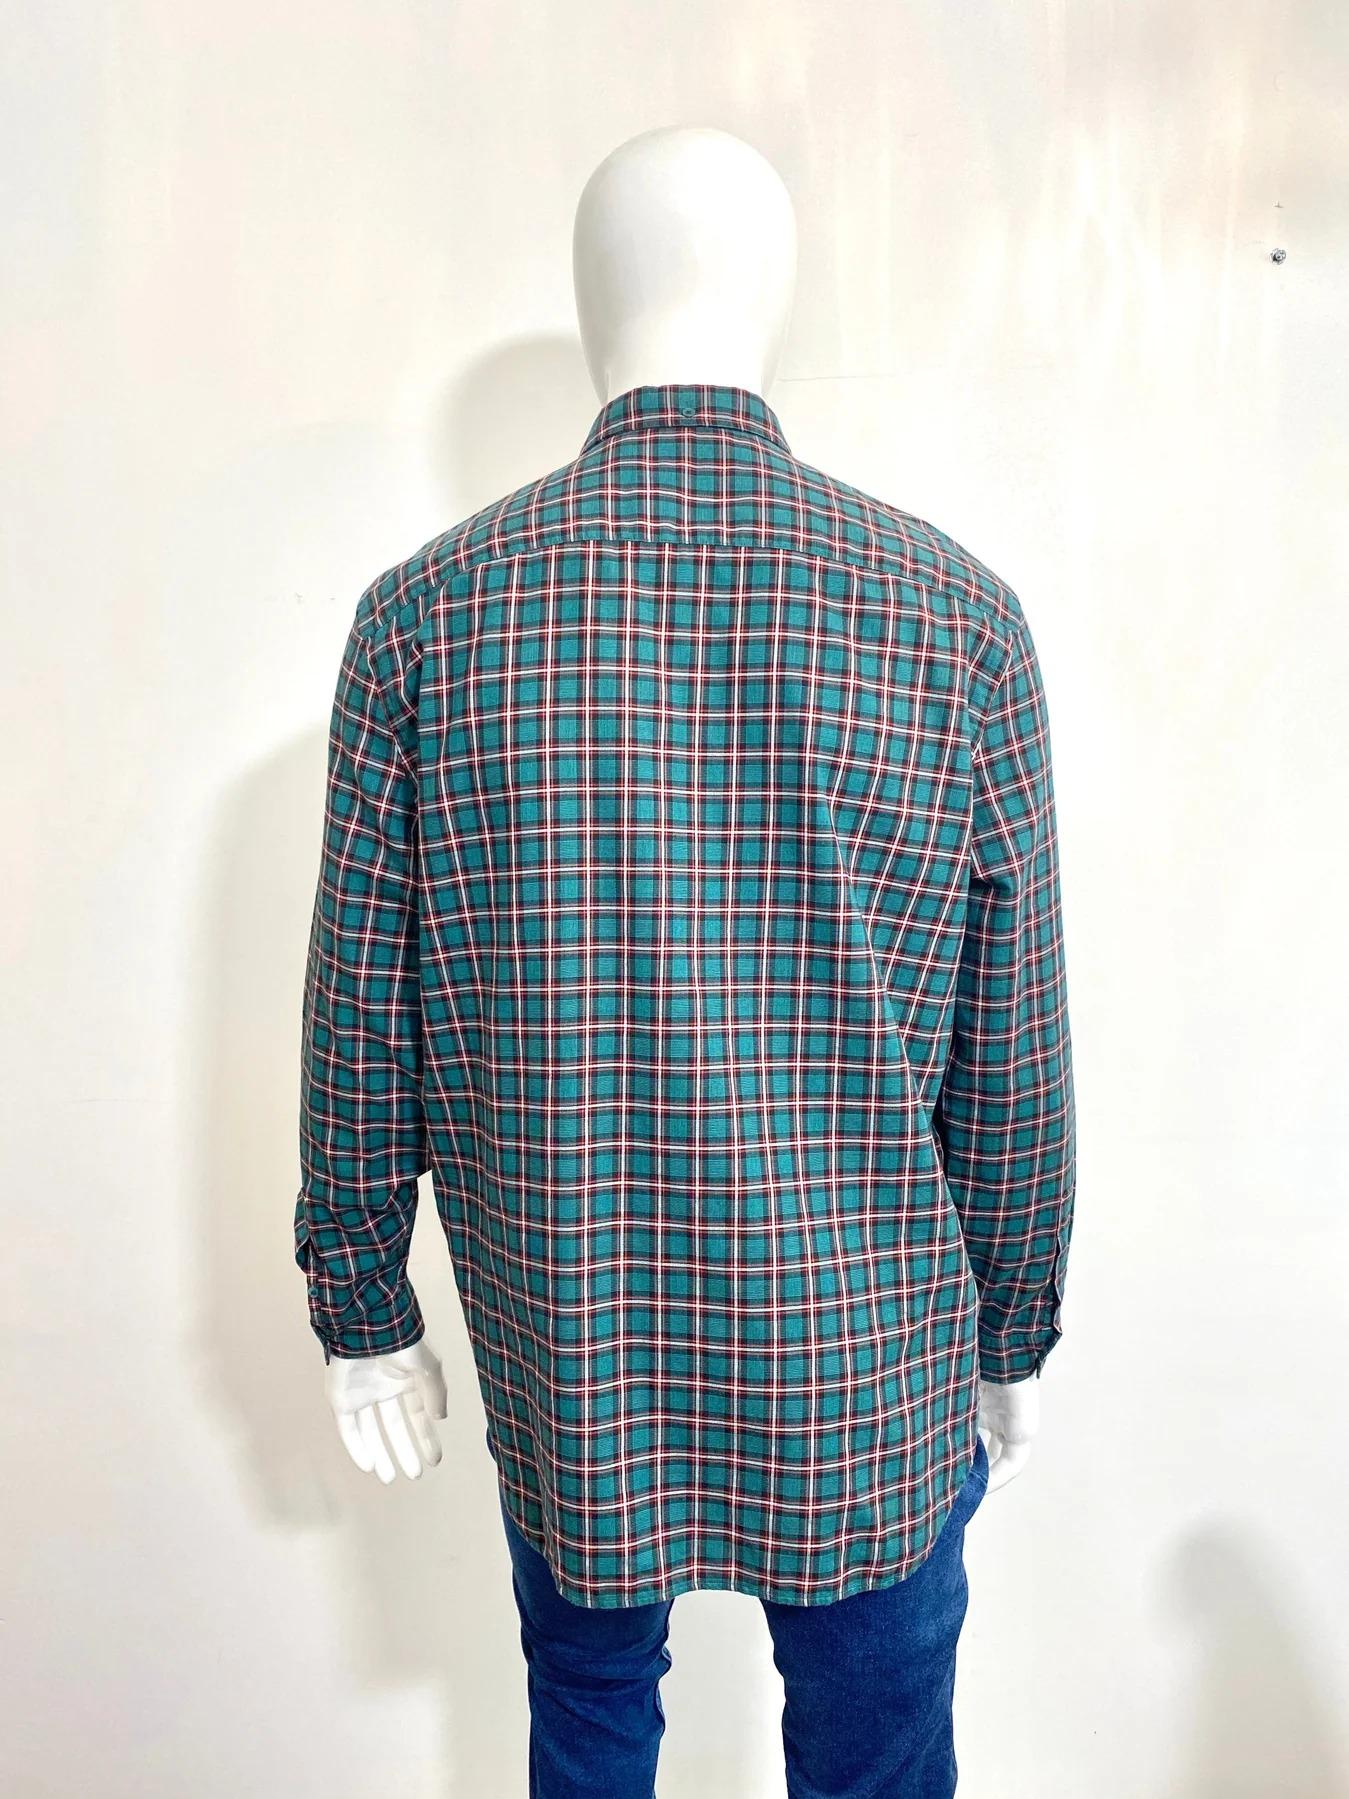 Burberry England Plaid Shirt In Excellent Condition For Sale In London, GB